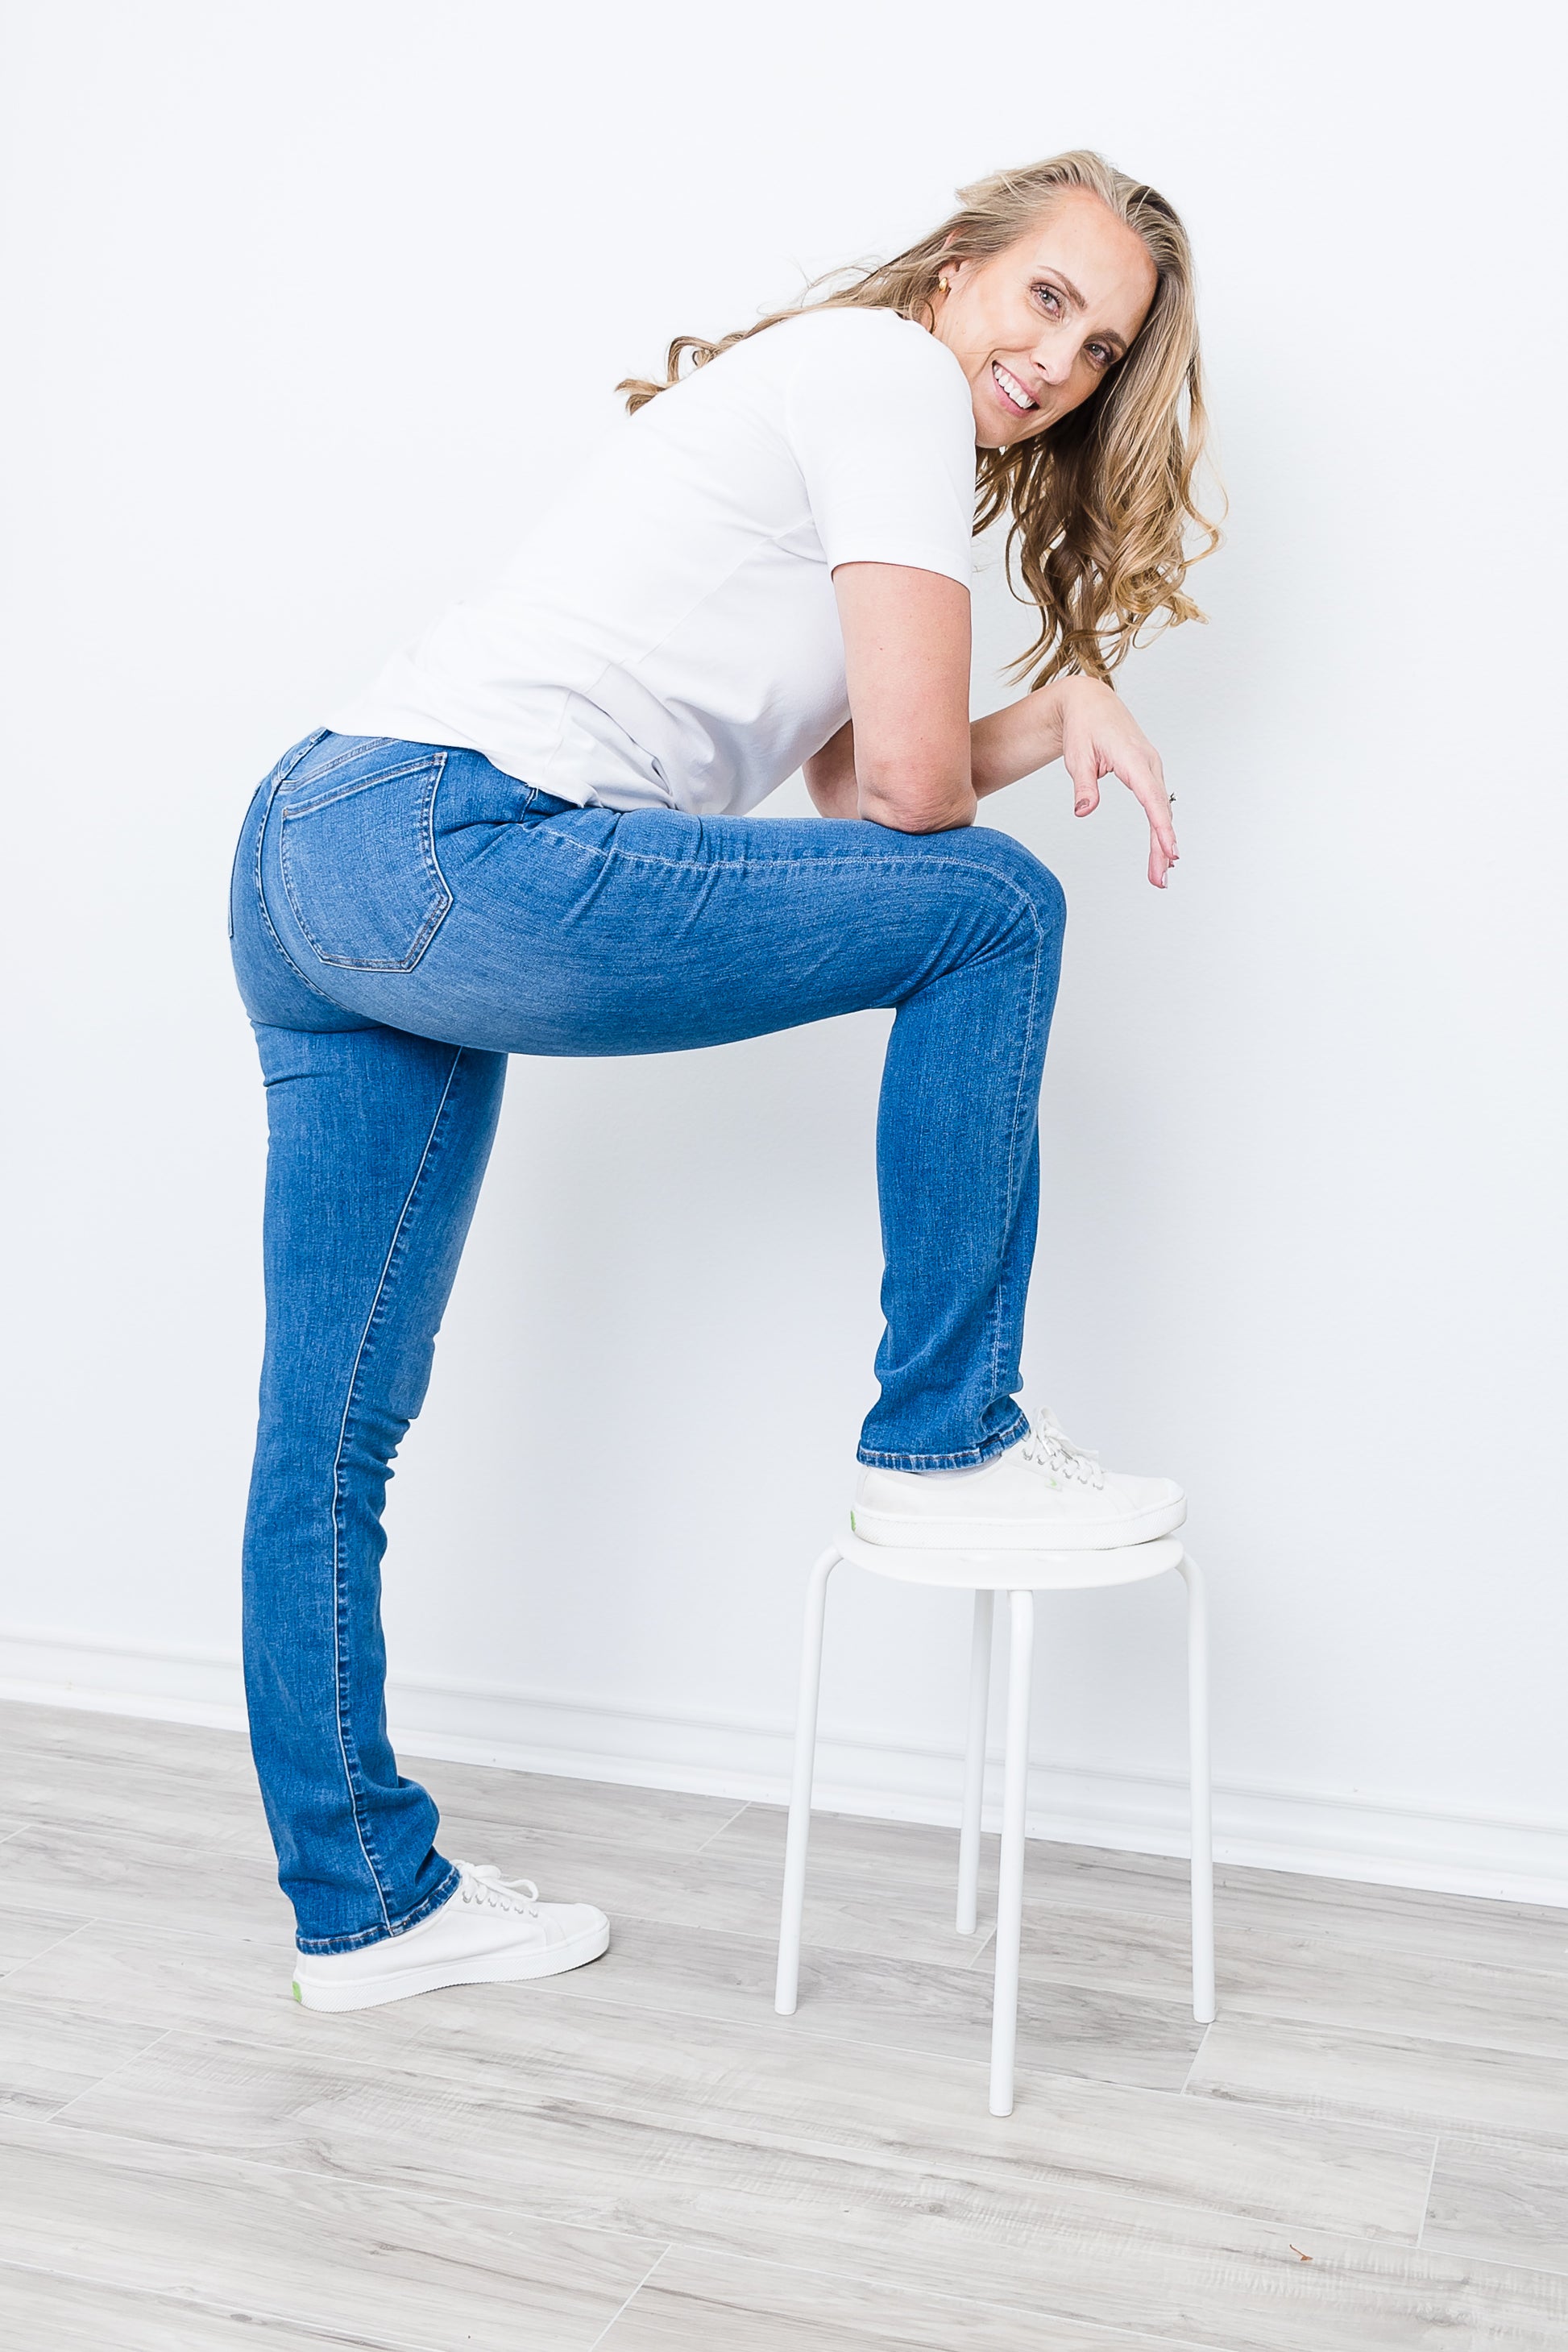 Tall Flare Jeans 36 & 38 inseams – The Elevated Closet